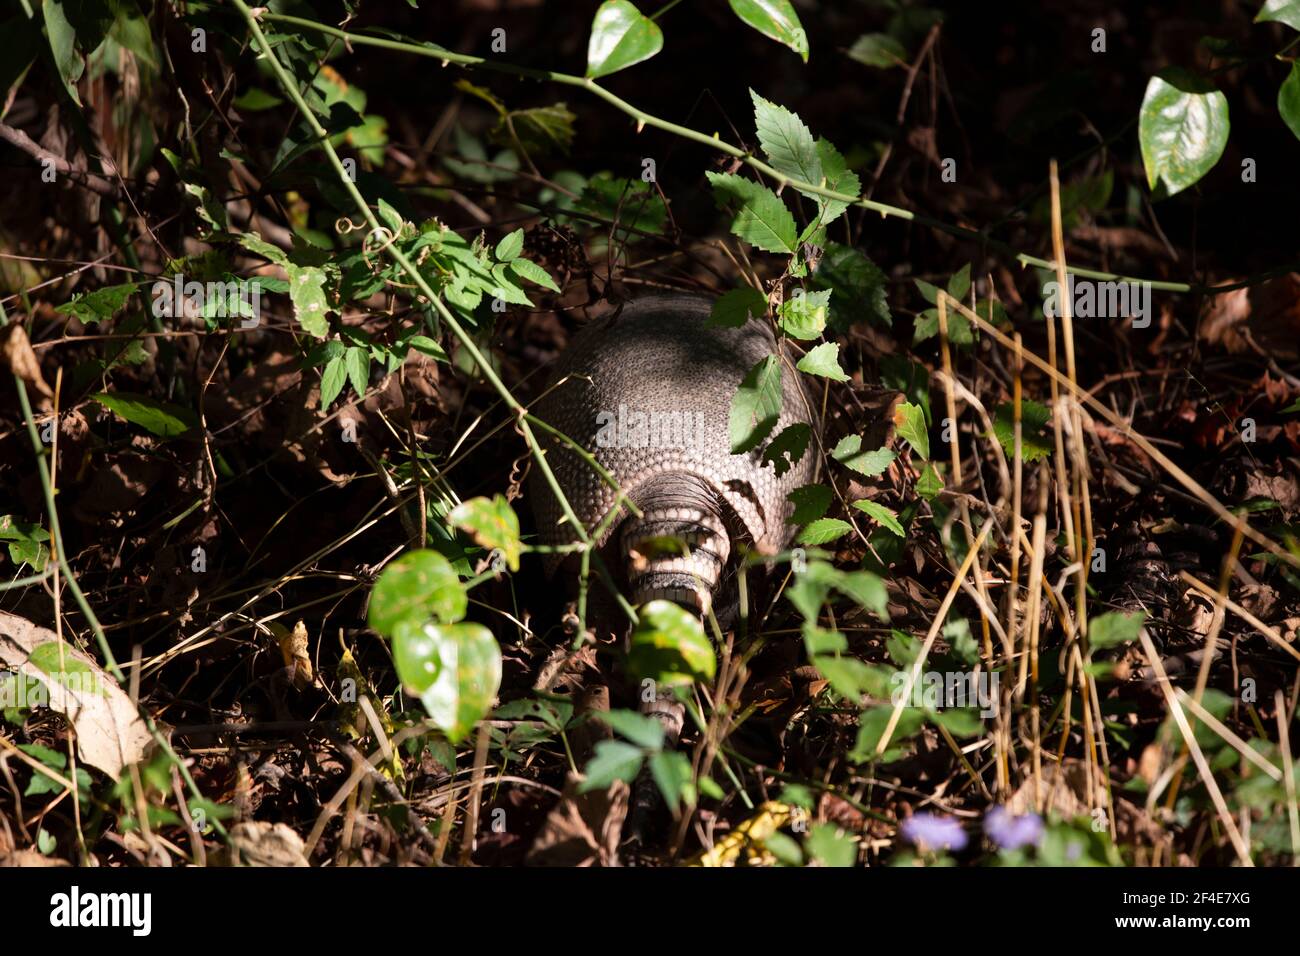 Nine-banded armadillo (Dasypus novemcinctus) foraging for insects in a yard behind thorny vines Stock Photo